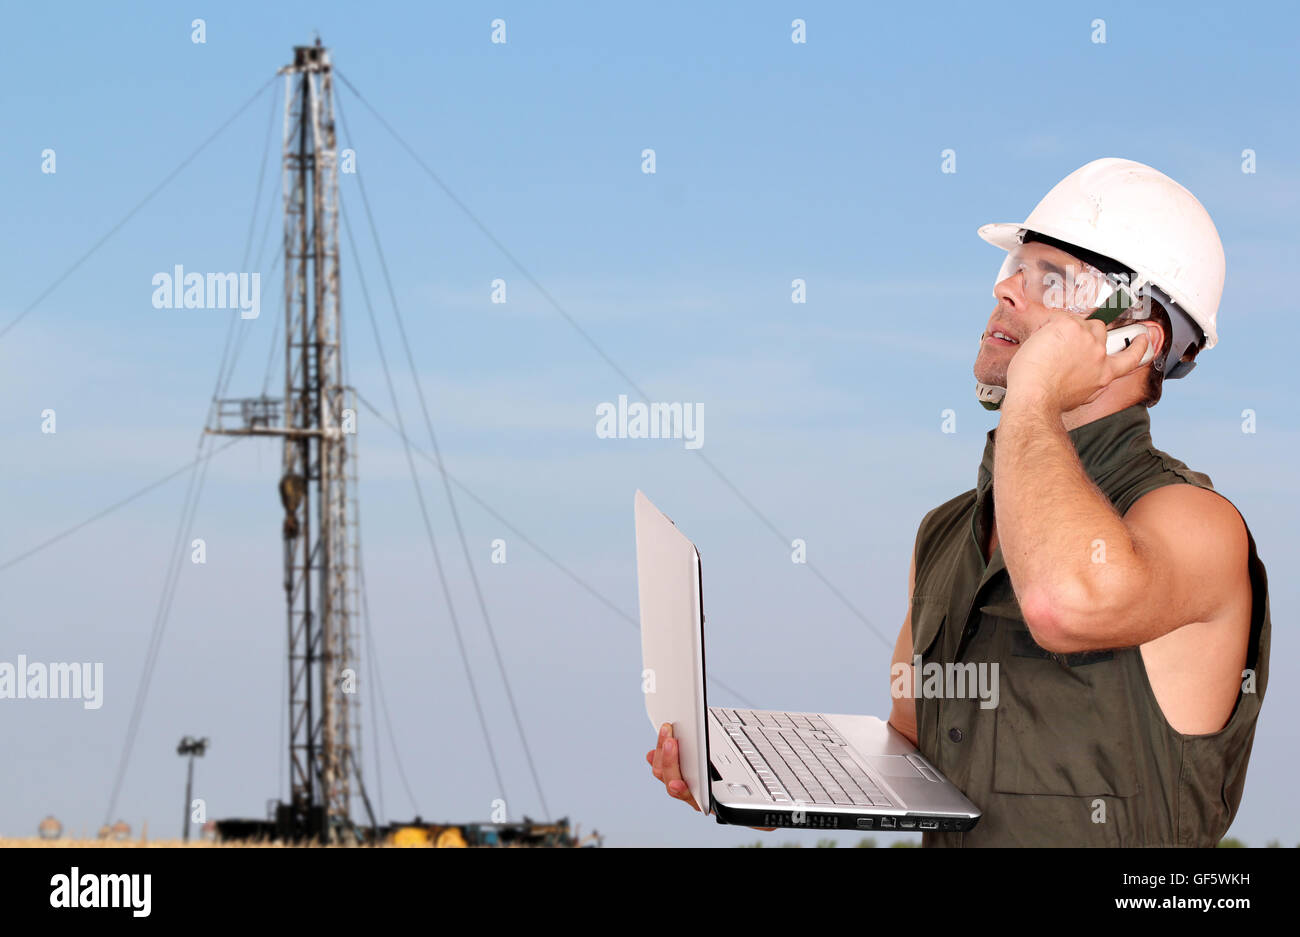 oil worker with laptop and rig Stock Photo